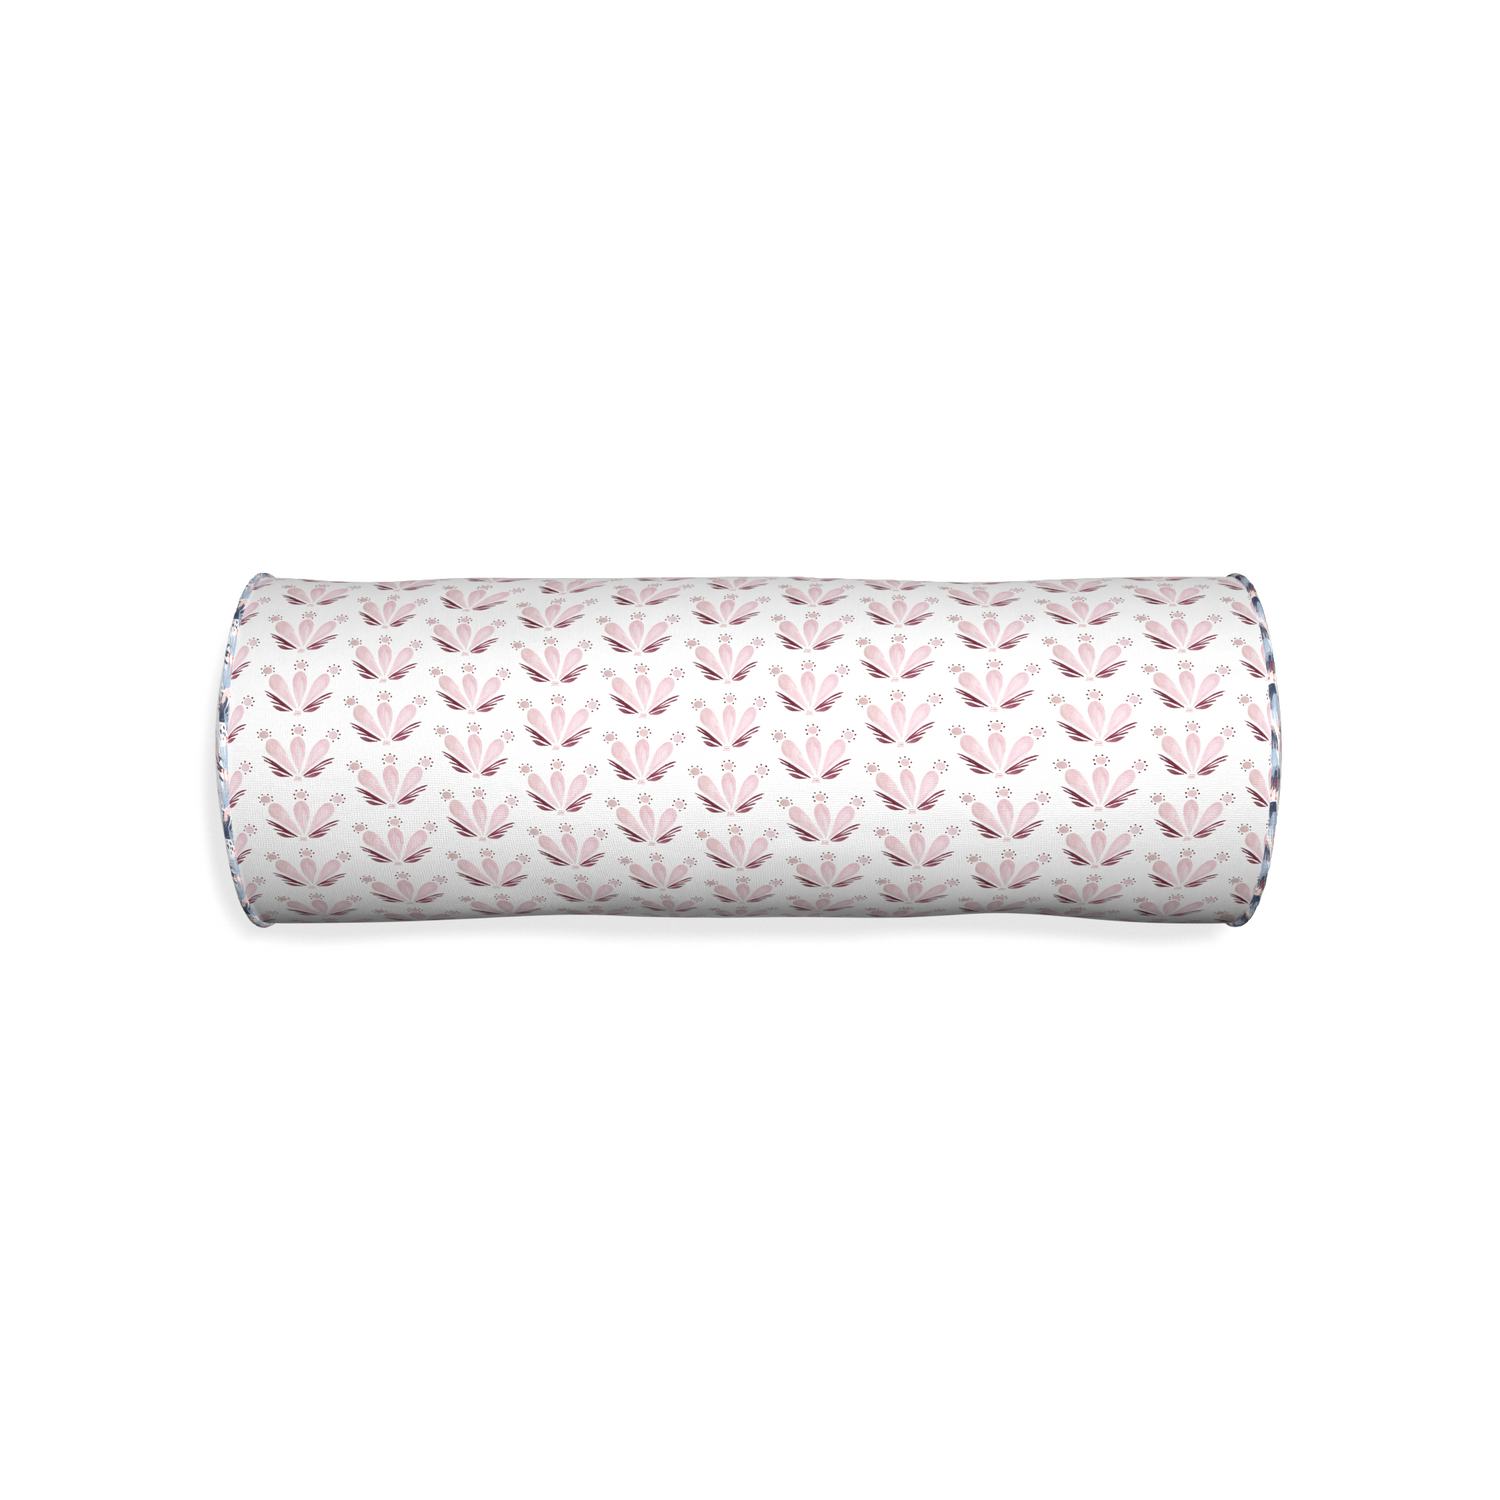 Bolster serena pink custom pink & burgundy drop repeat floralpillow with e piping on white background